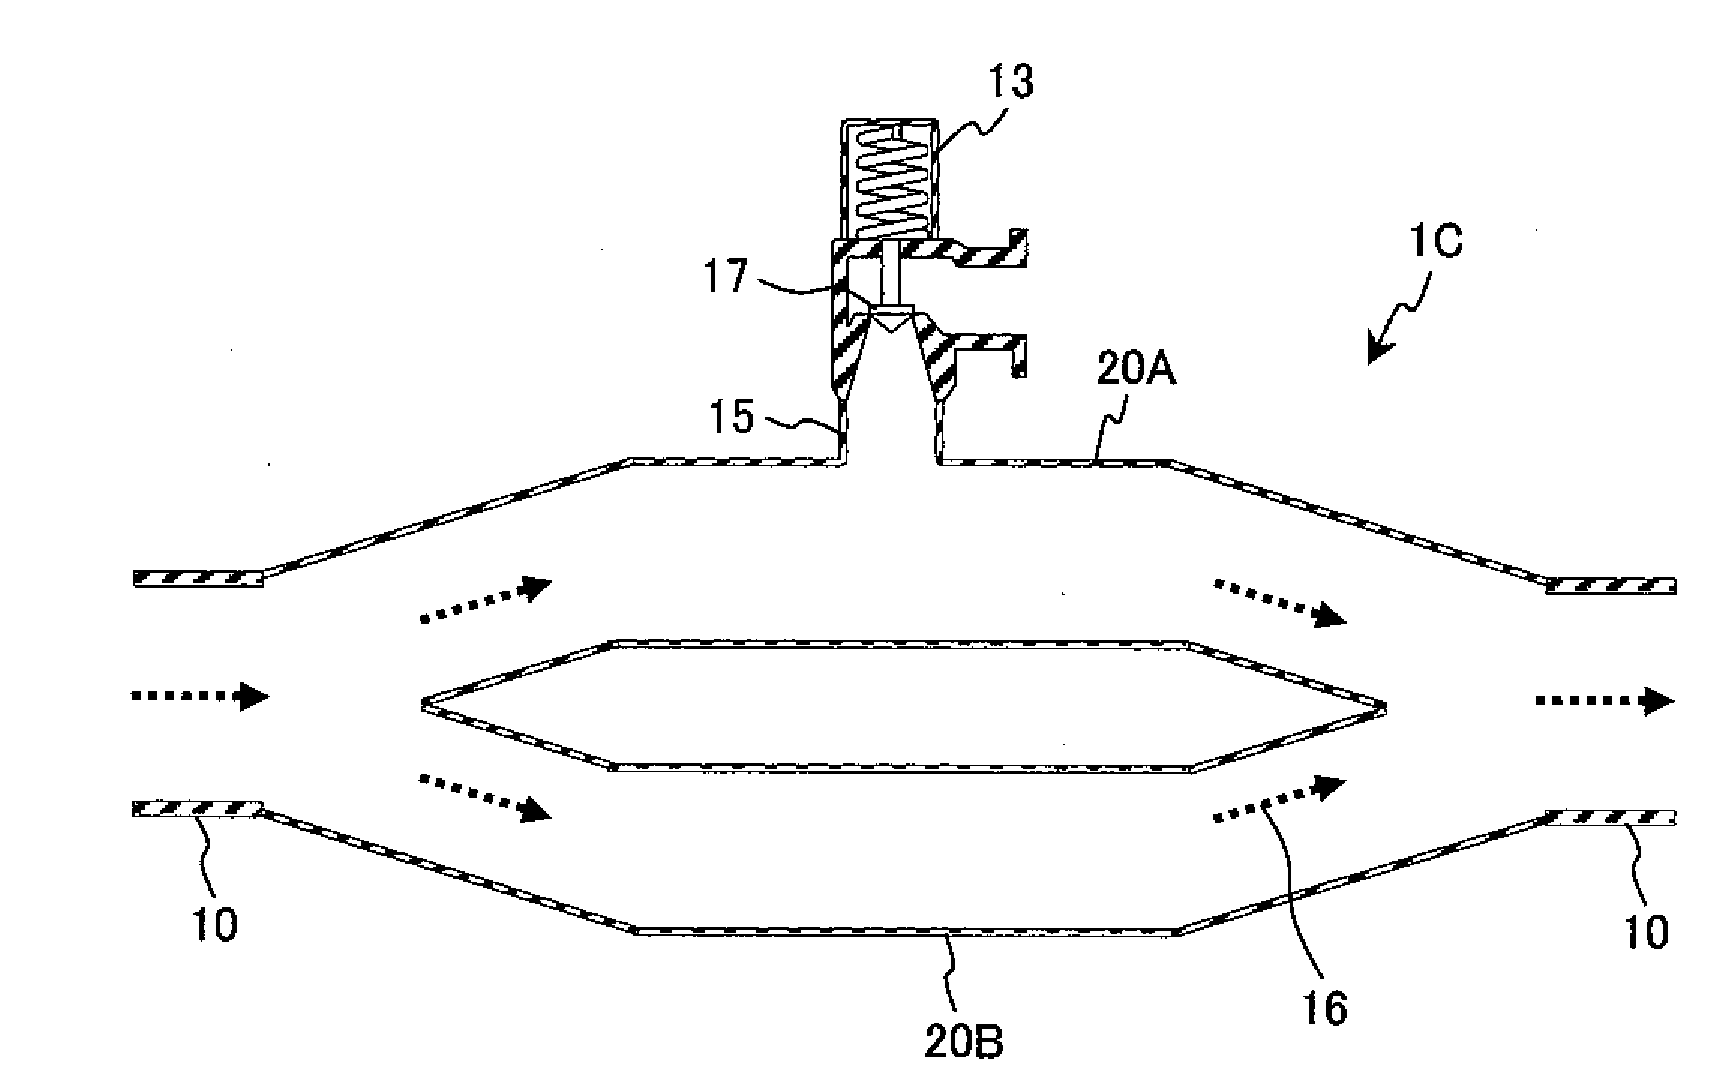 Plant with Piping Mounted on Branch Pipe and Boiling Water Reactor Plant